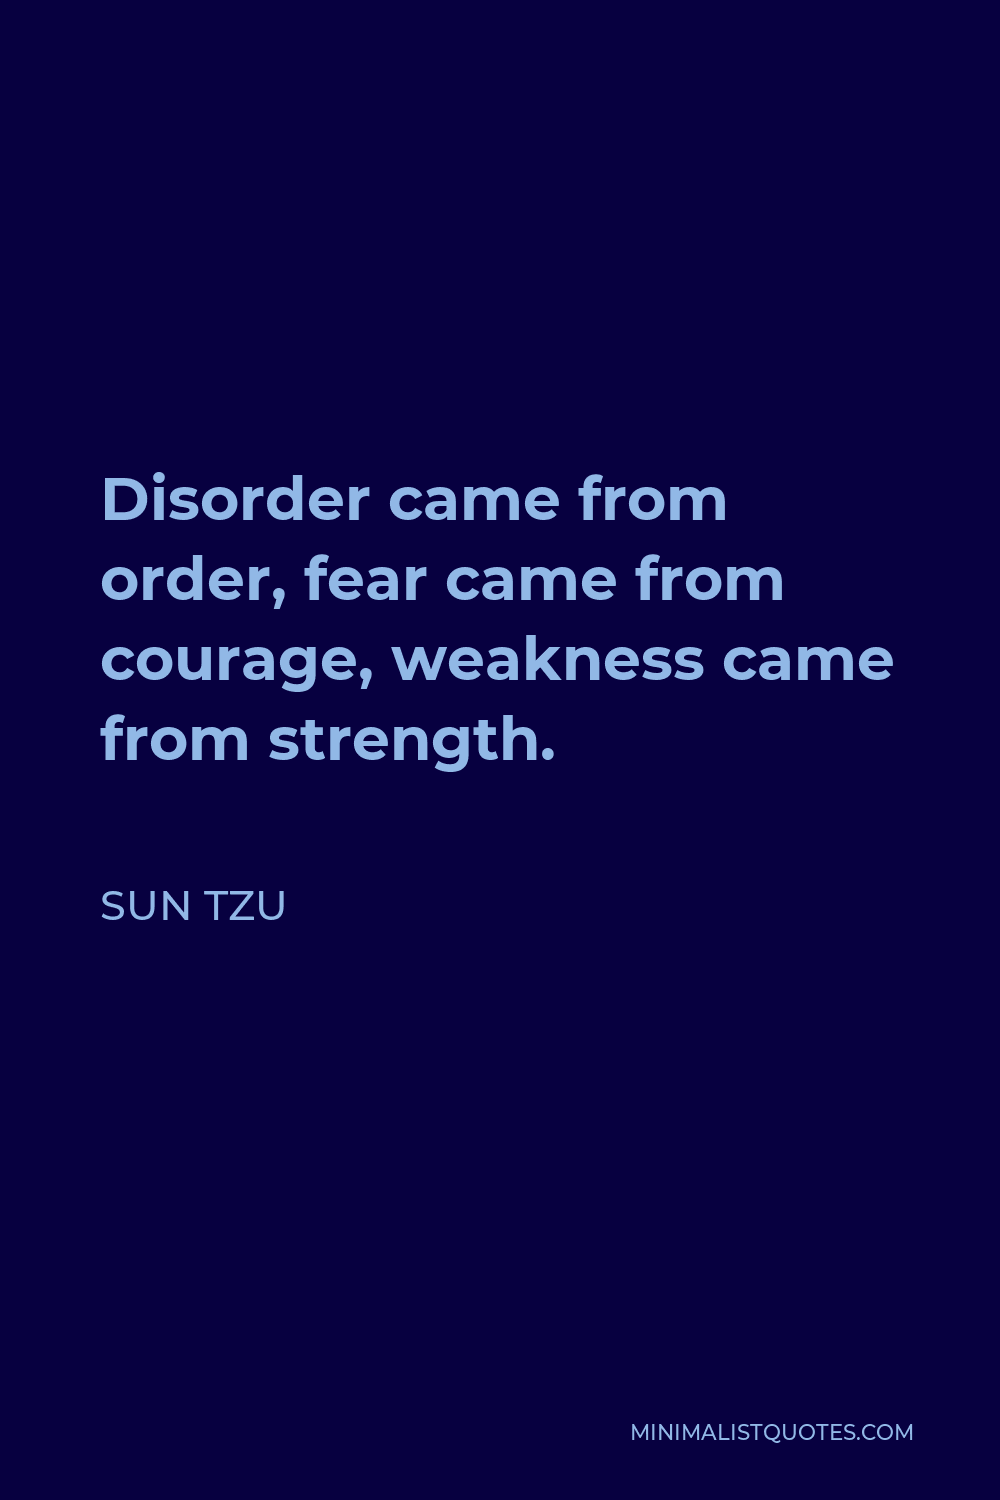 Sun Tzu Quote - Disorder came from order, fear came from courage, weakness came from strength.